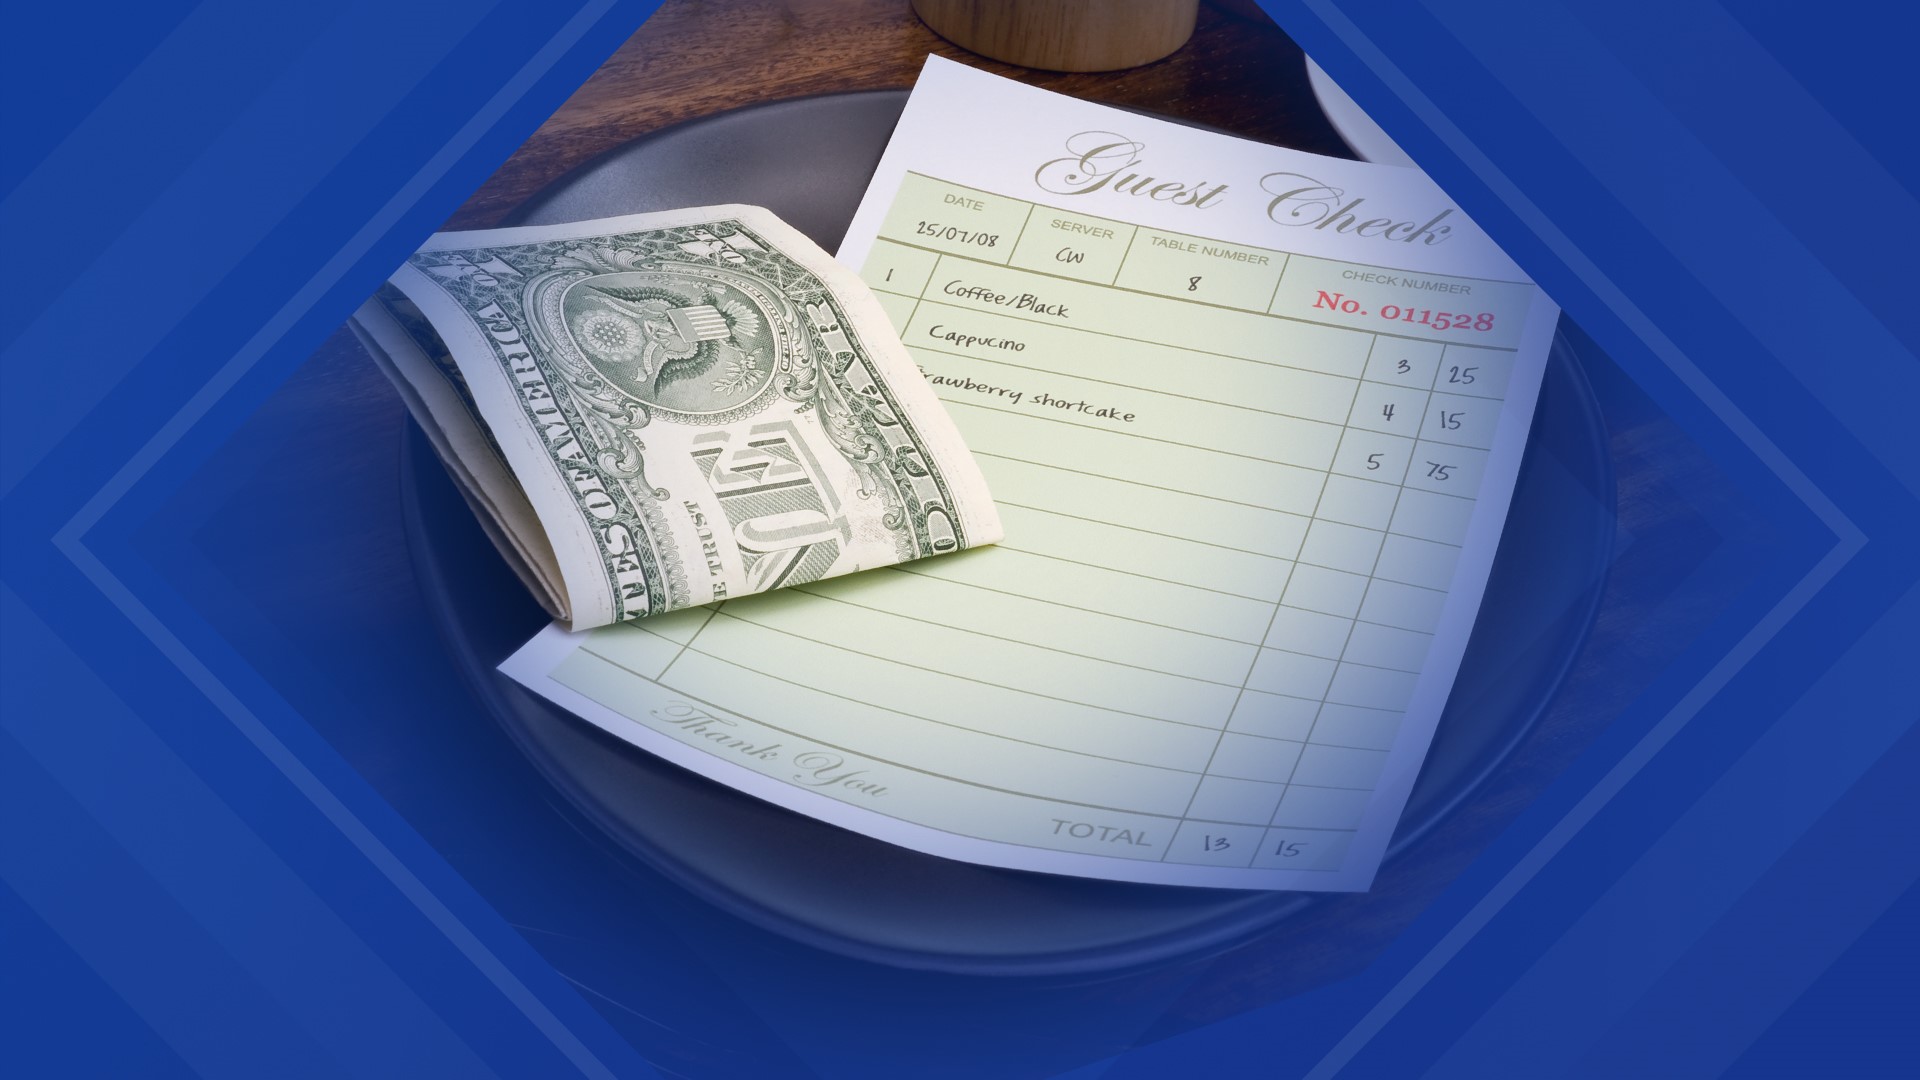 Earlier this week, a state regulatory commission decided that tipped workers who make less than $135 a month in tips must get paid minimum wage.